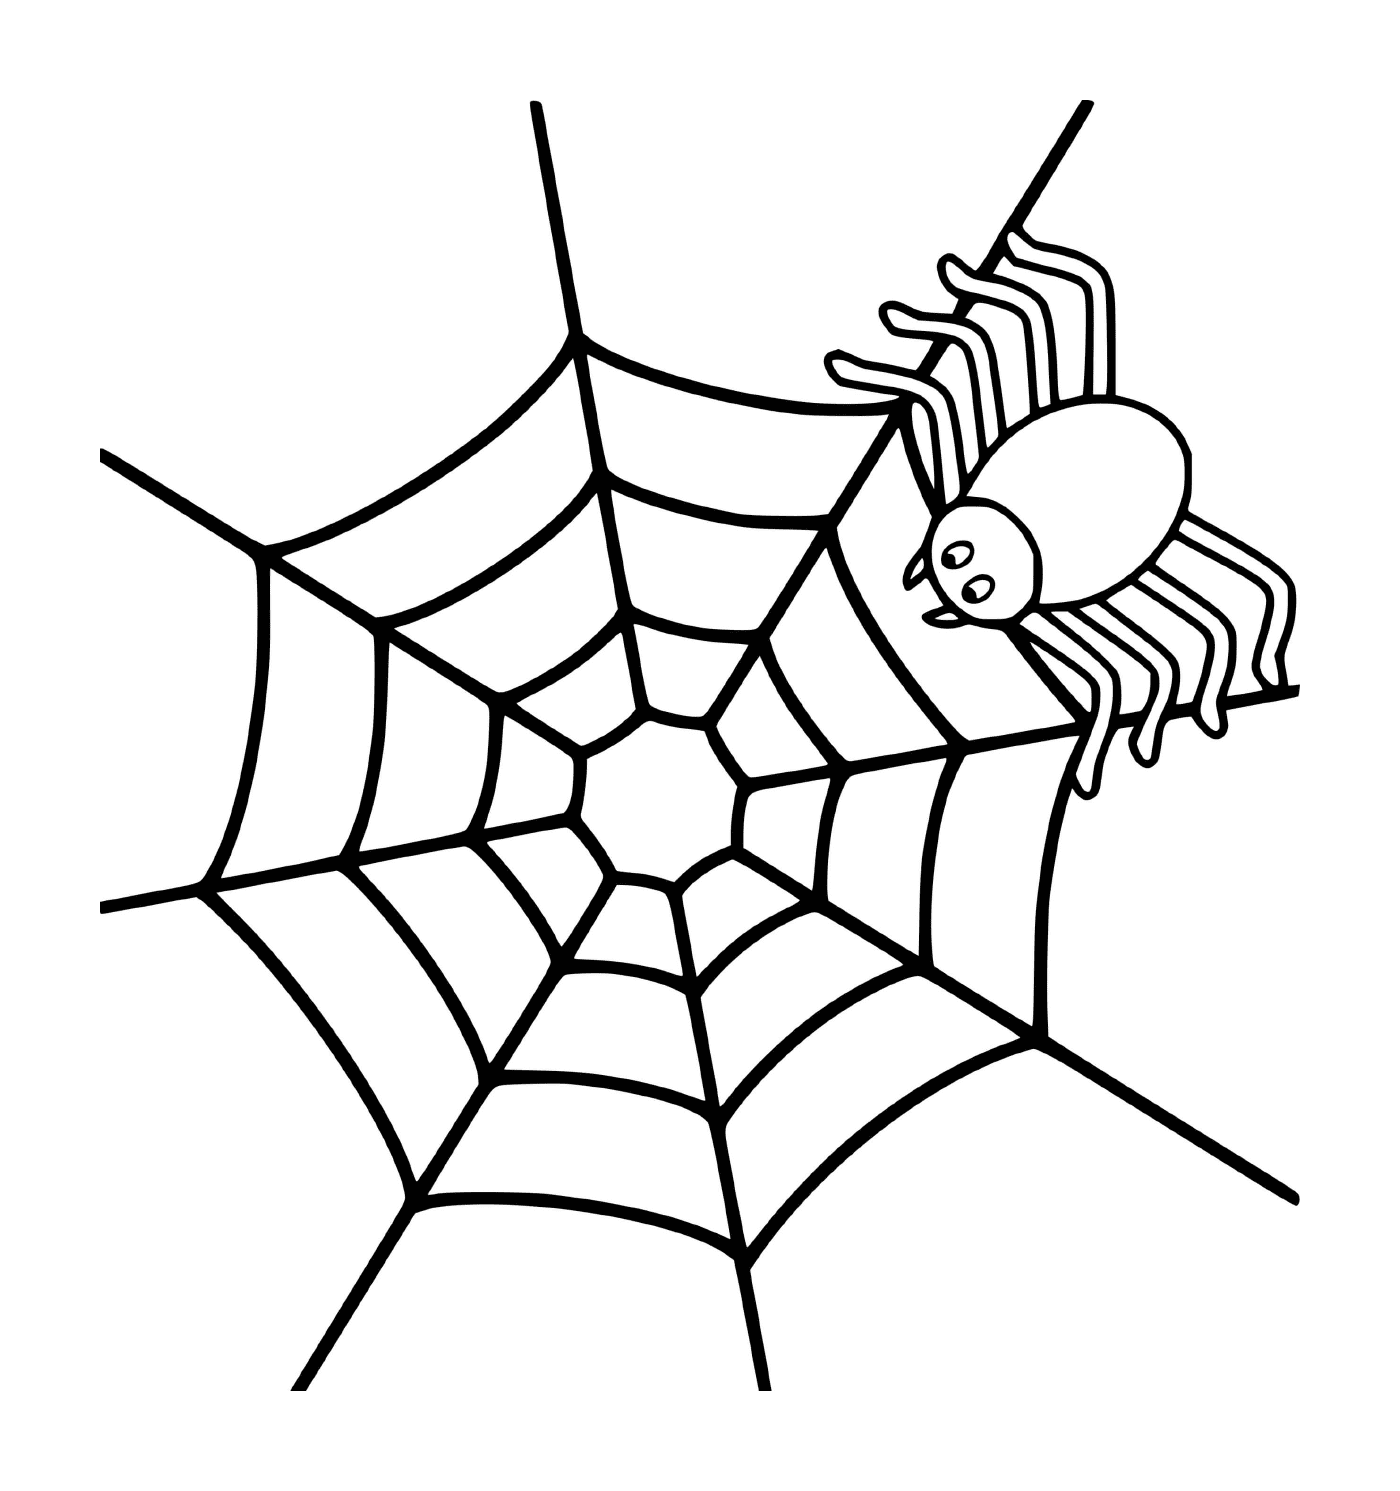  A simple spider on a web 